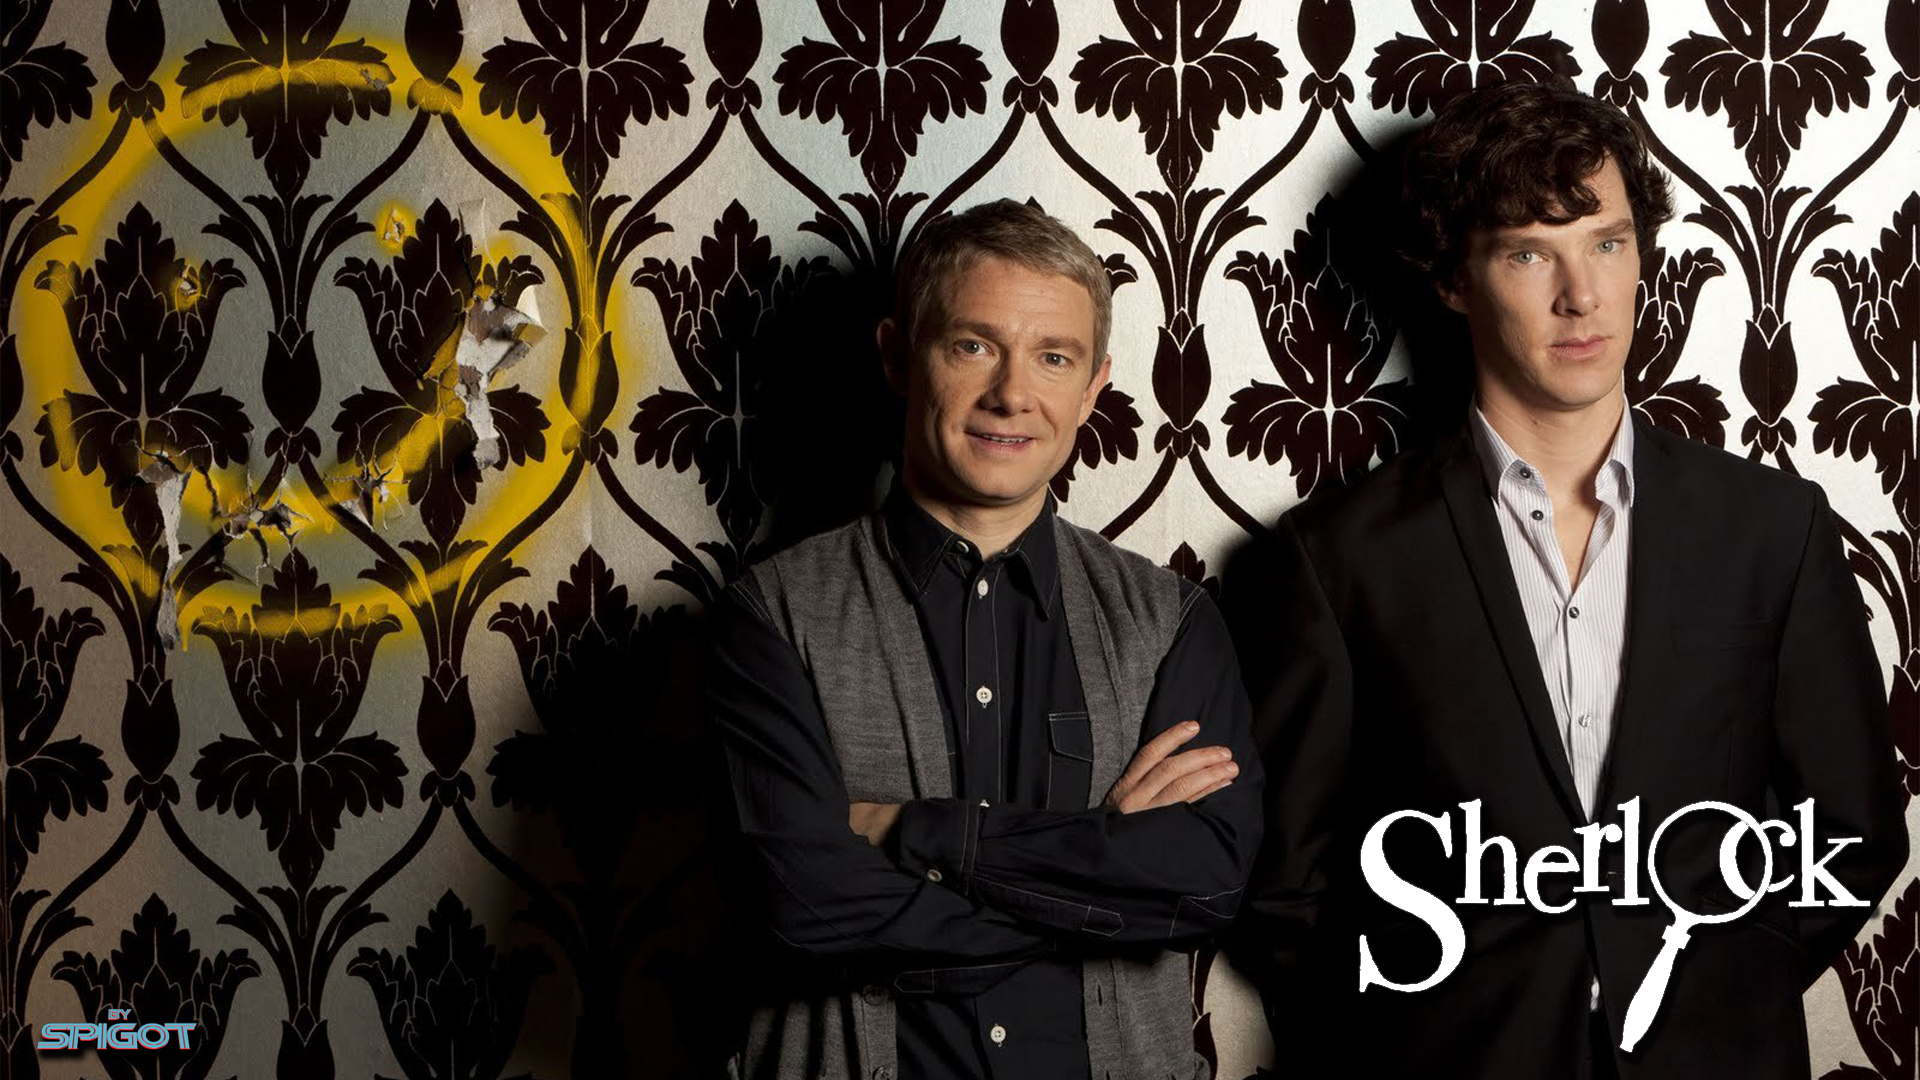 Couple Of Wallpaper From The Excellent Sherlock Tv Series For Penfold